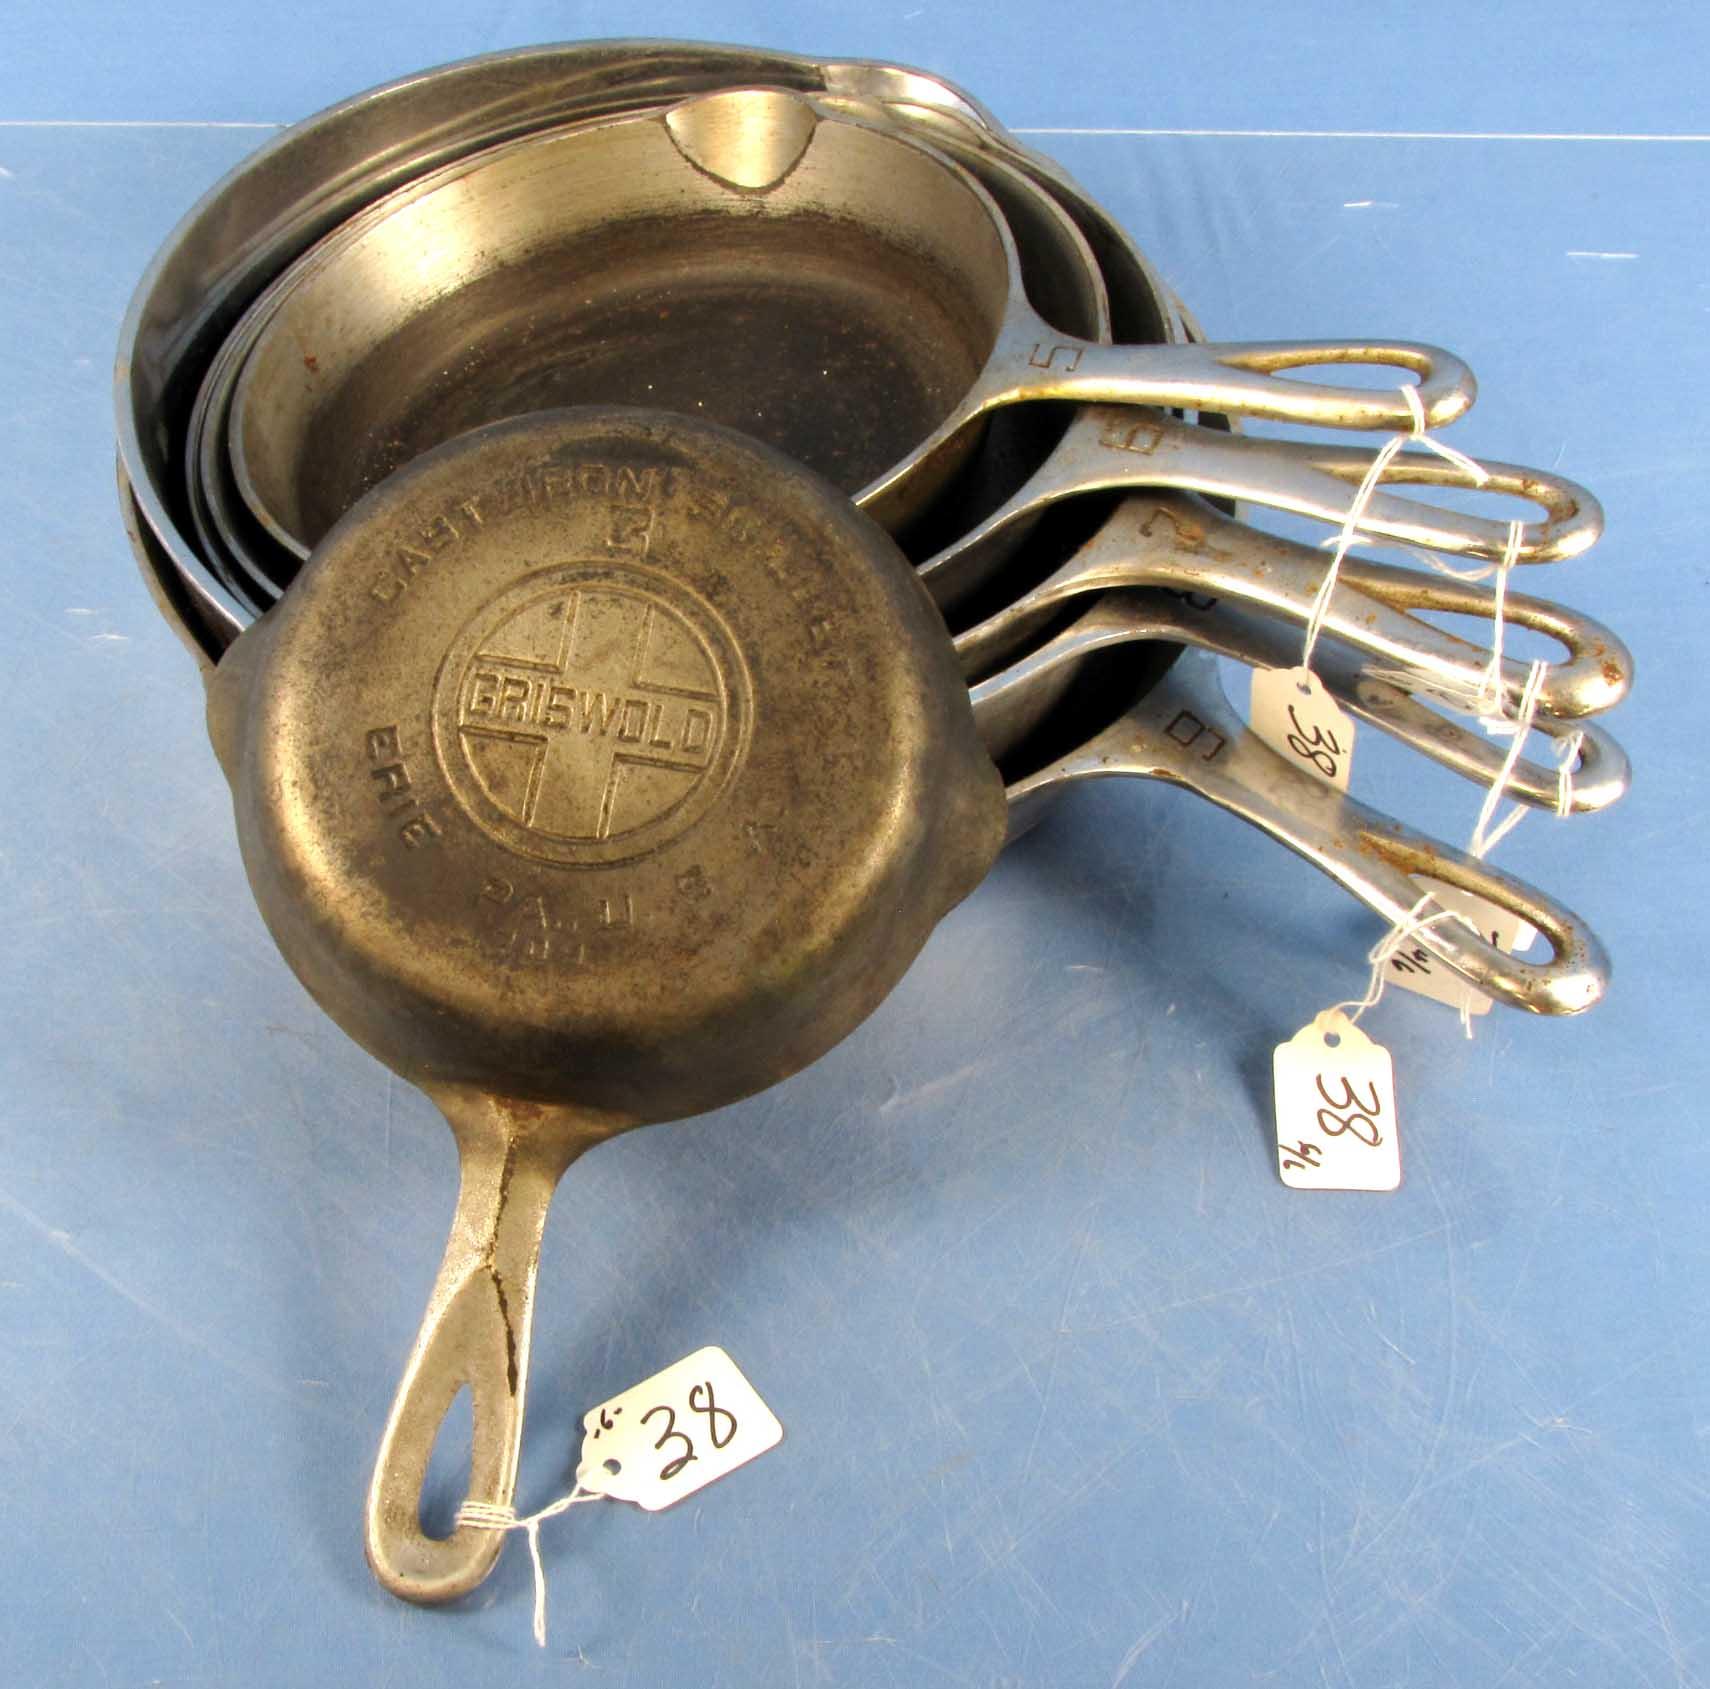 Skillets; Griswold; Epu; Ll; Block; Smooth; #3;5;6;7;8;9; Chrome